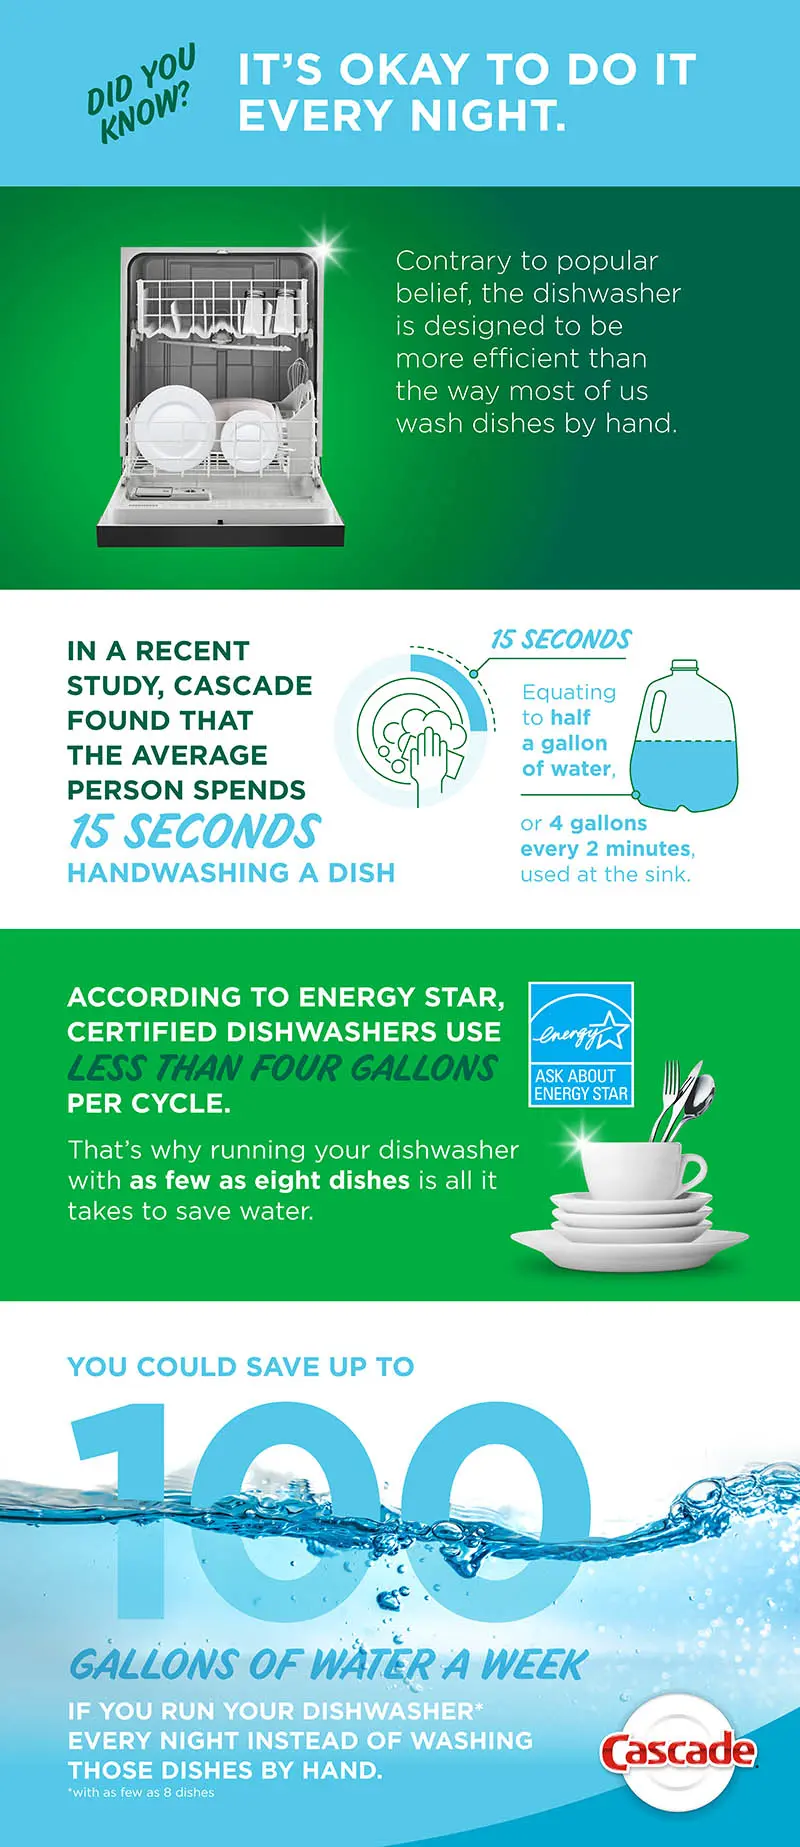 How to Save Water By Hand Washing Dishes Like This - Organic Authority